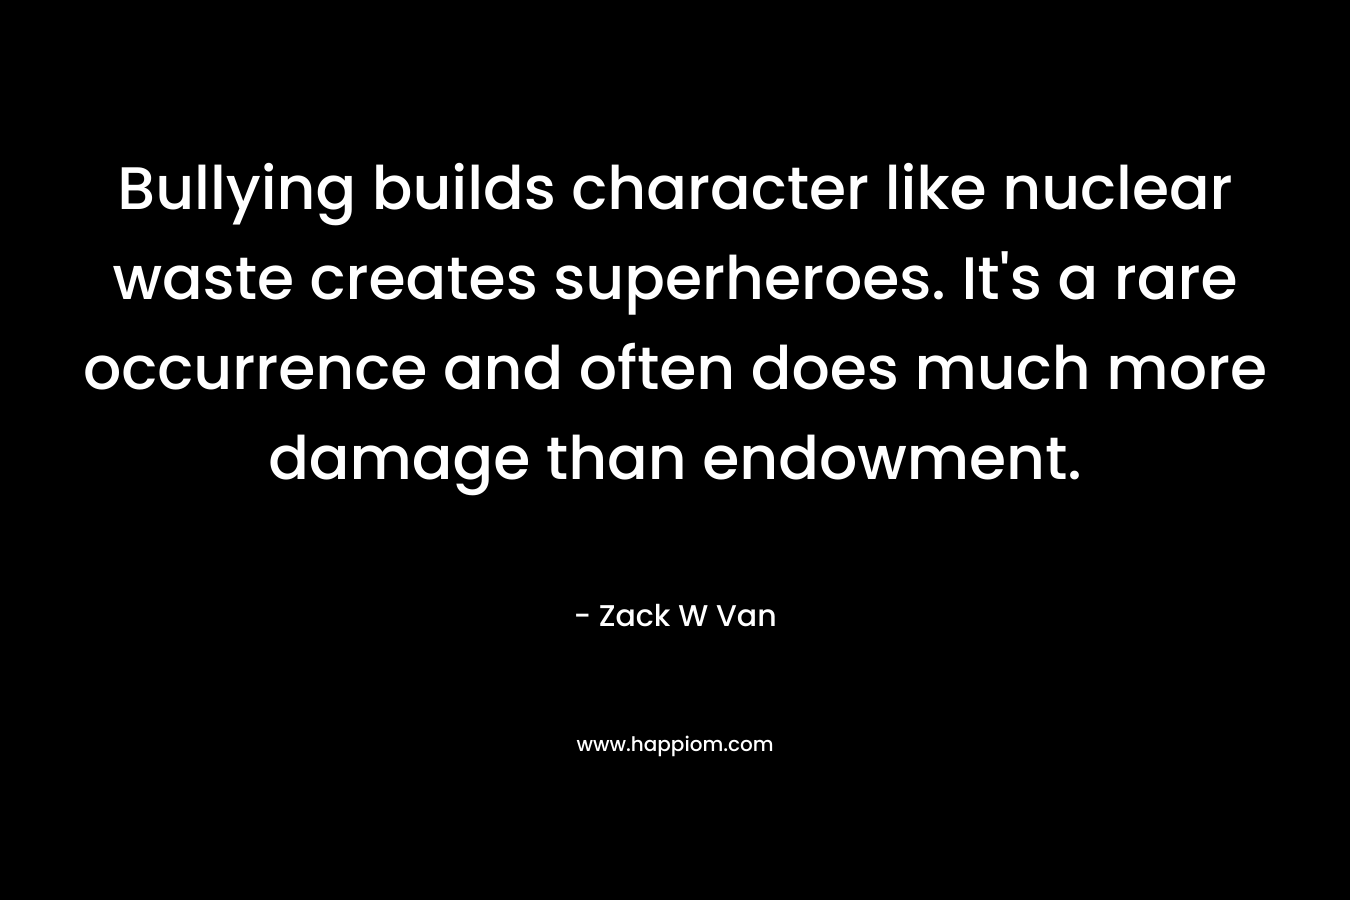 Bullying builds character like nuclear waste creates superheroes. It’s a rare occurrence and often does much more damage than endowment. – Zack W Van